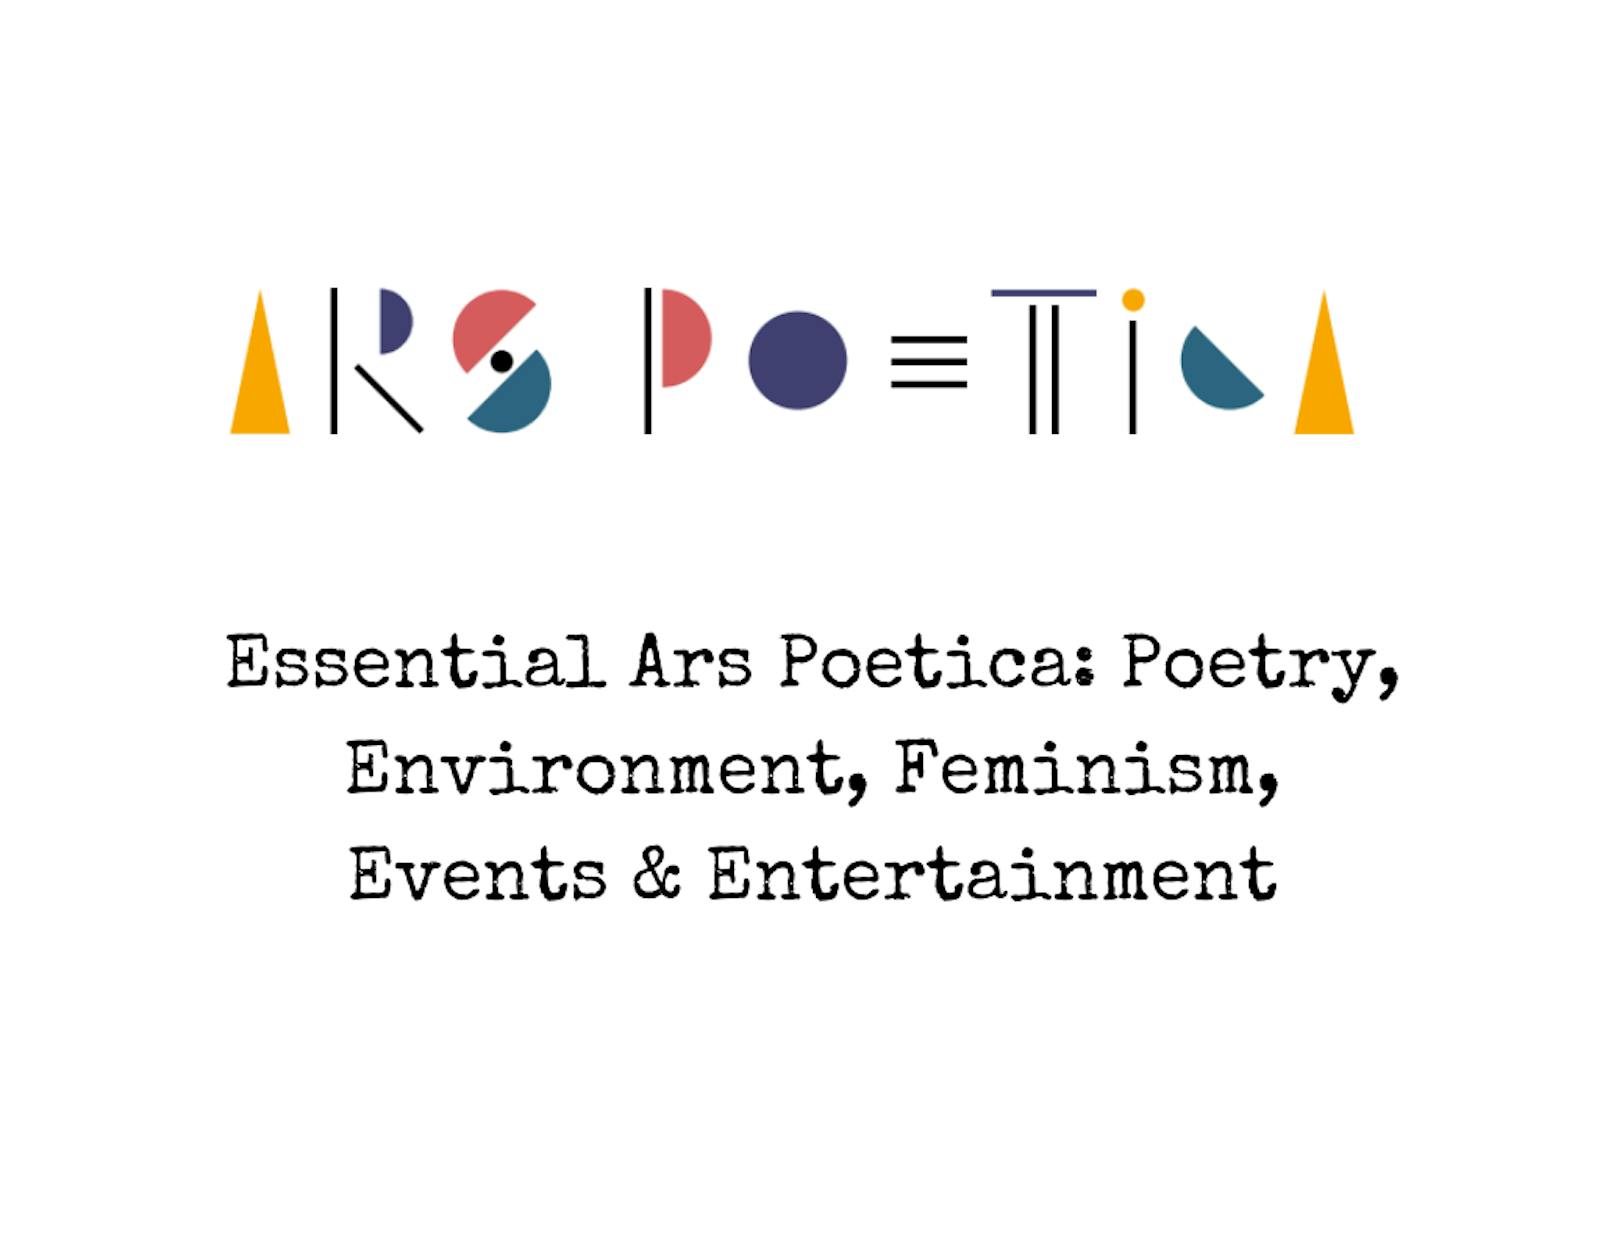 Check Out the Essential Ars Poetica Book List